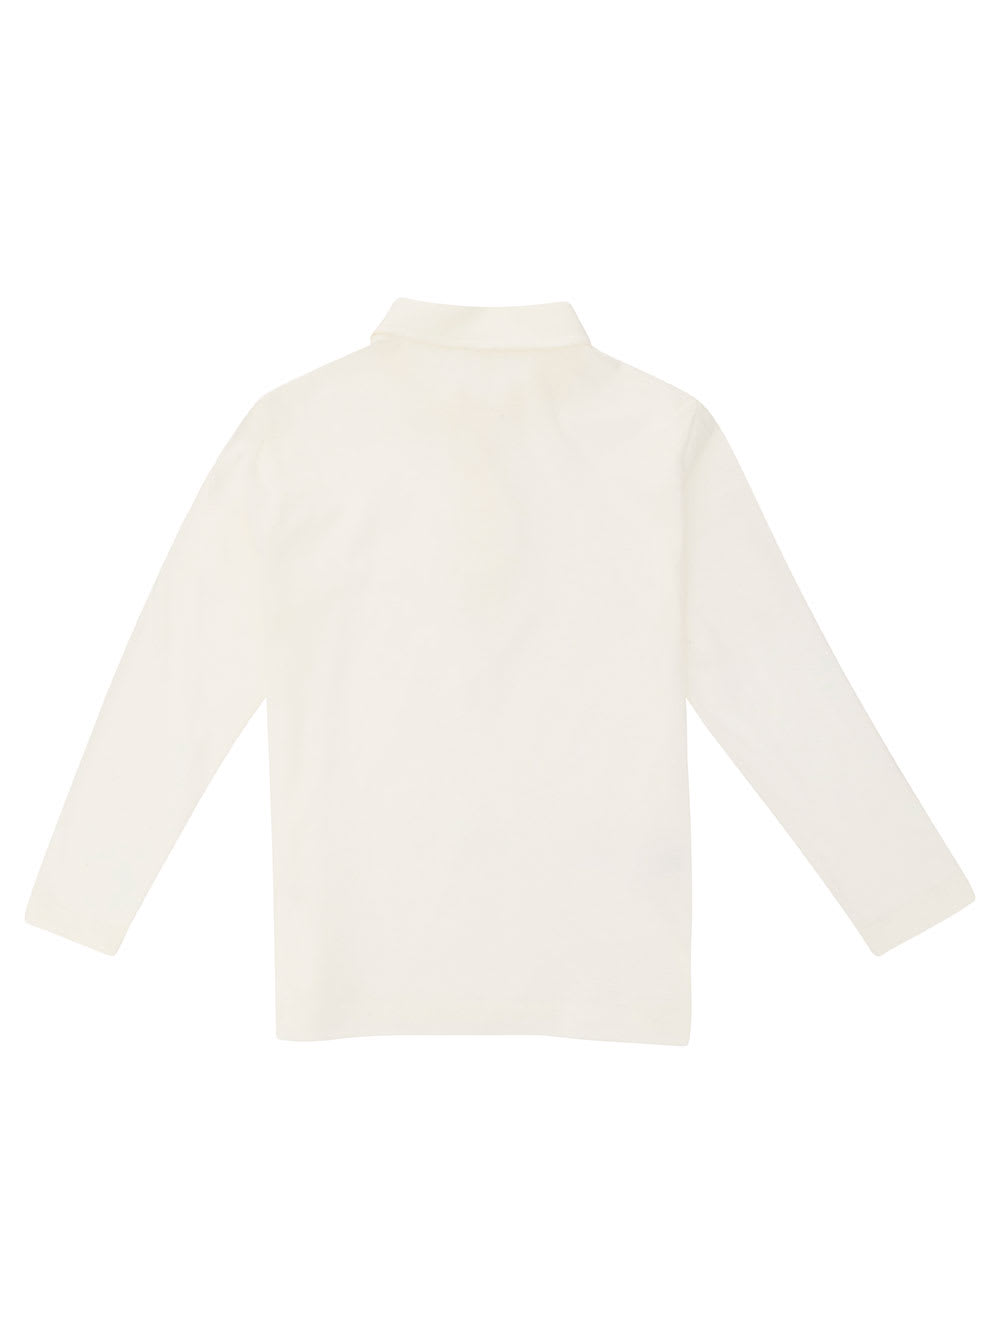 Shop Il Gufo White Long Sleeve Polo Shirt In Cotton And Linen Boy